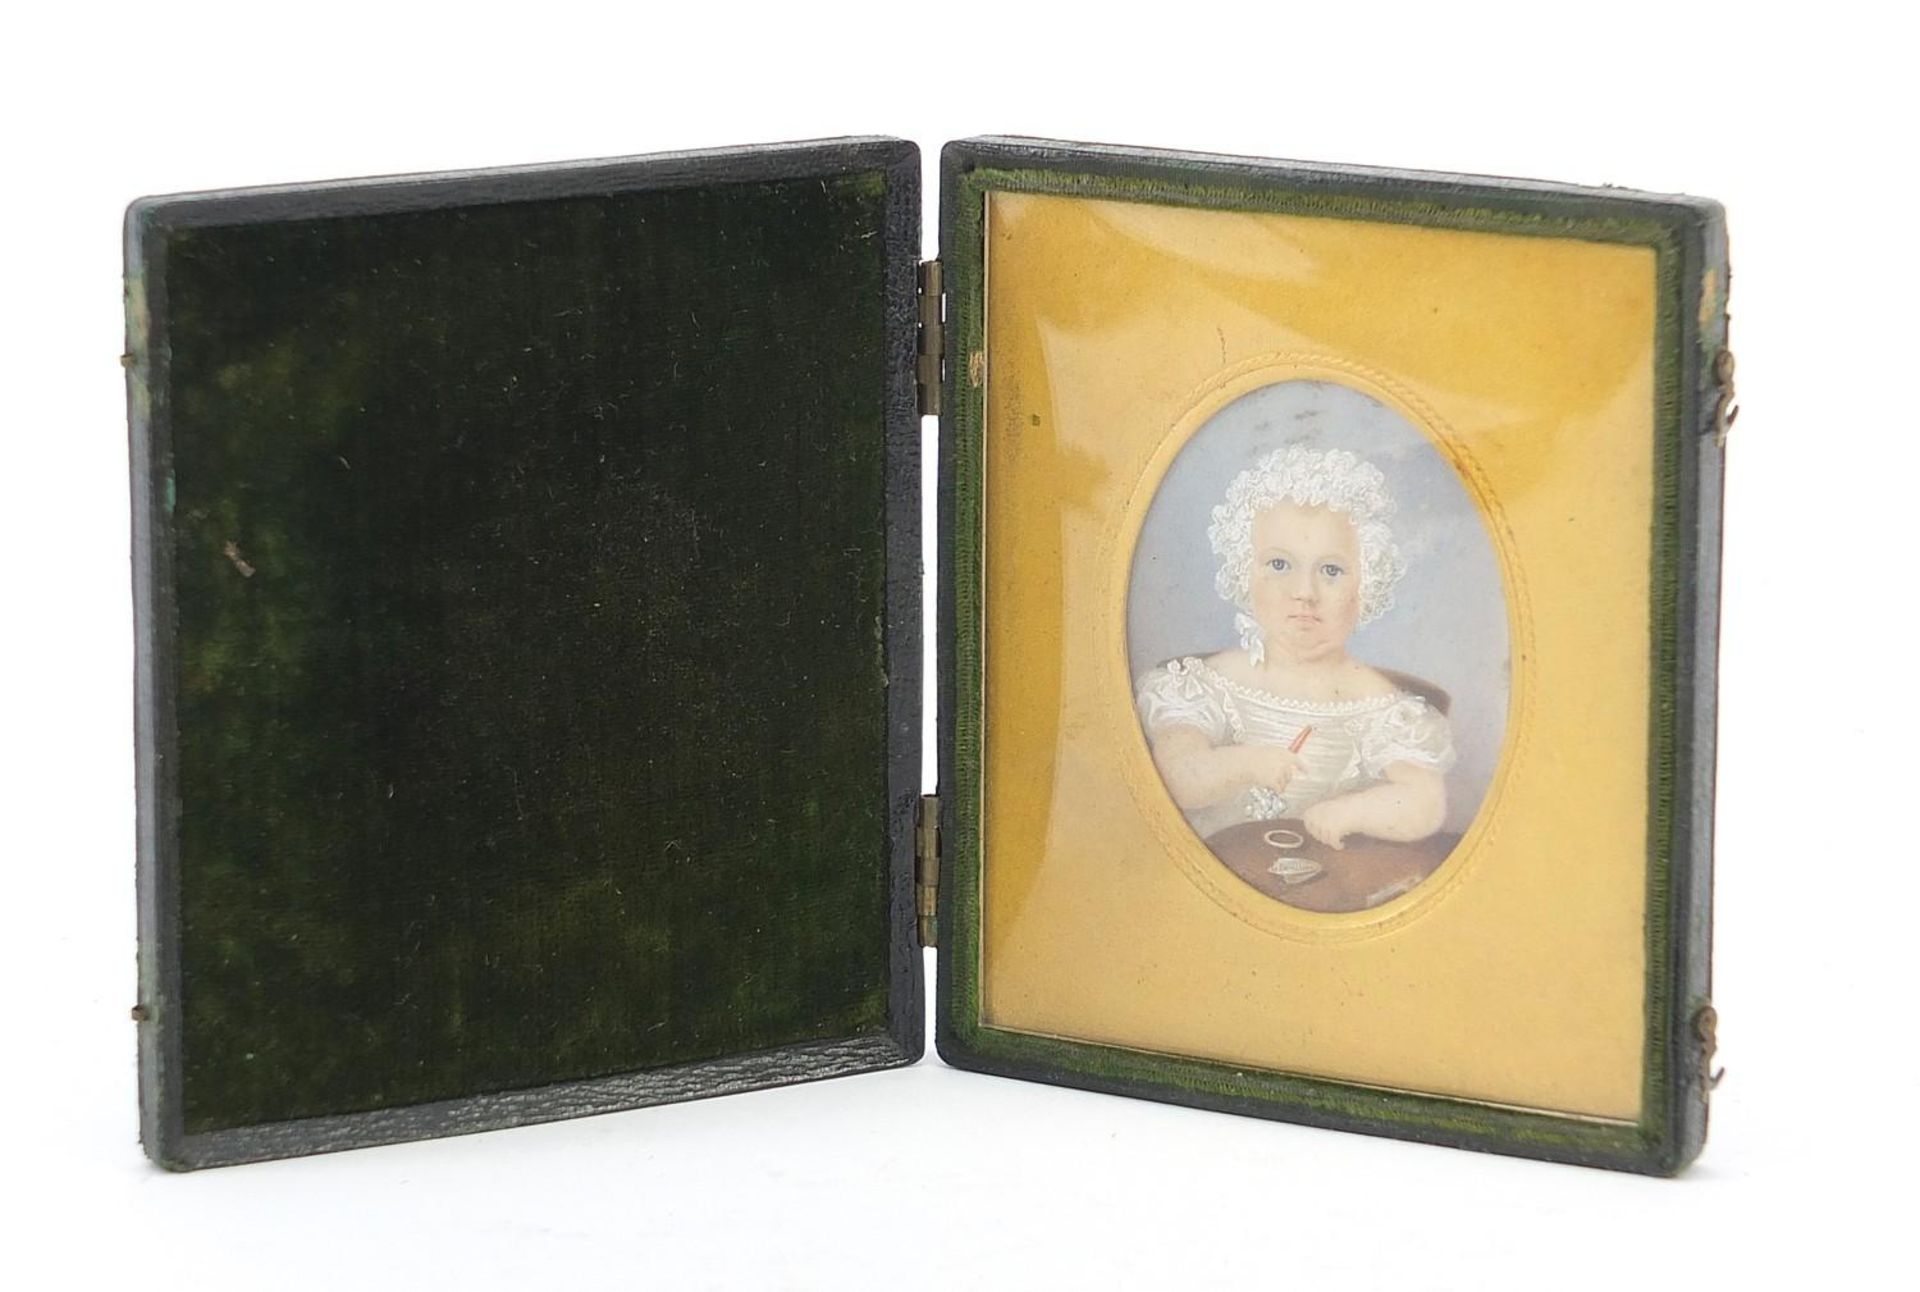 19th century oval hand painted portrait miniature of a young girl holding a rattle, housed in a